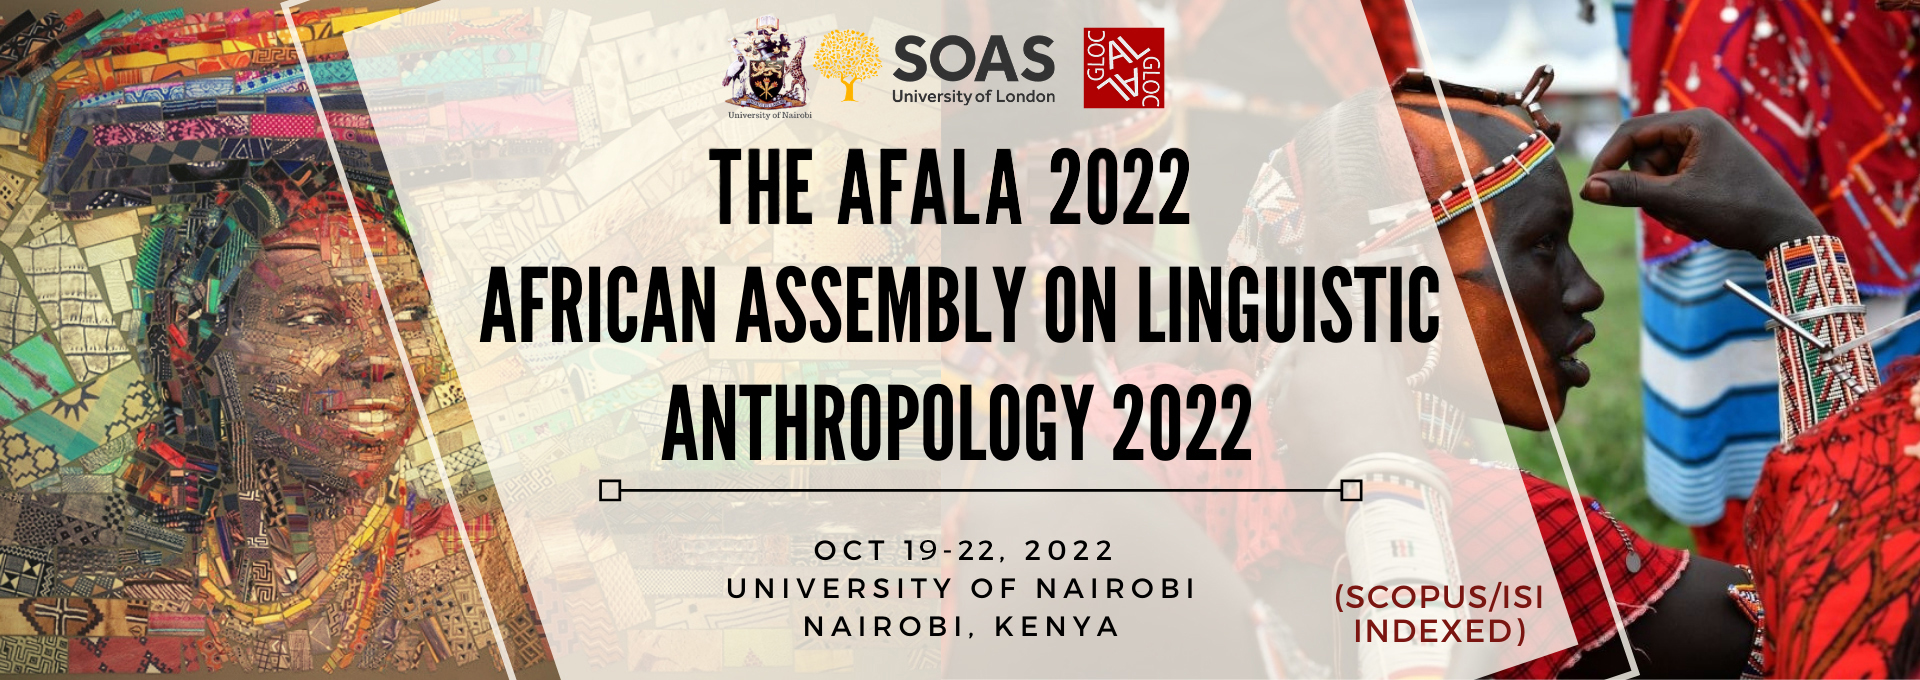 The AFALA 2022 - The African Assembly on Linguistic Anthropology 2022, Nairobi, Kenya